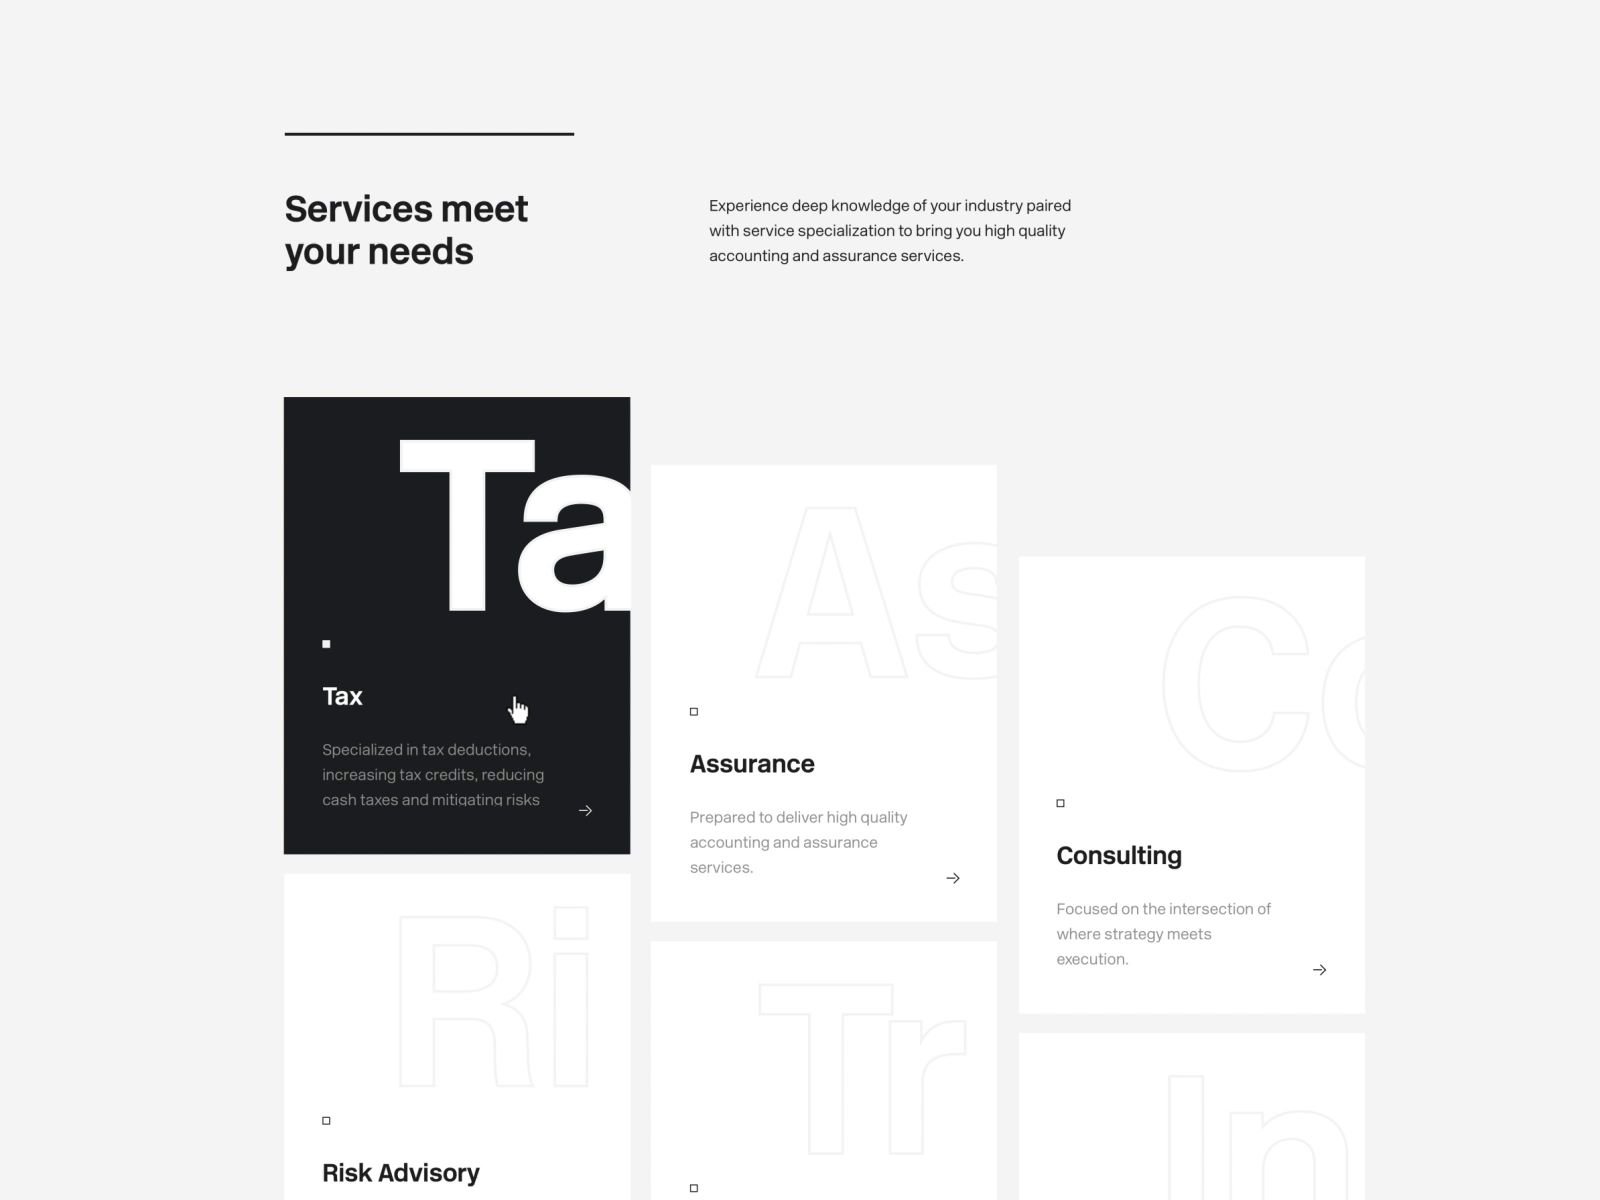 baker-tilly-services-by-marco-coppeto-for-ueno-on-dribbble